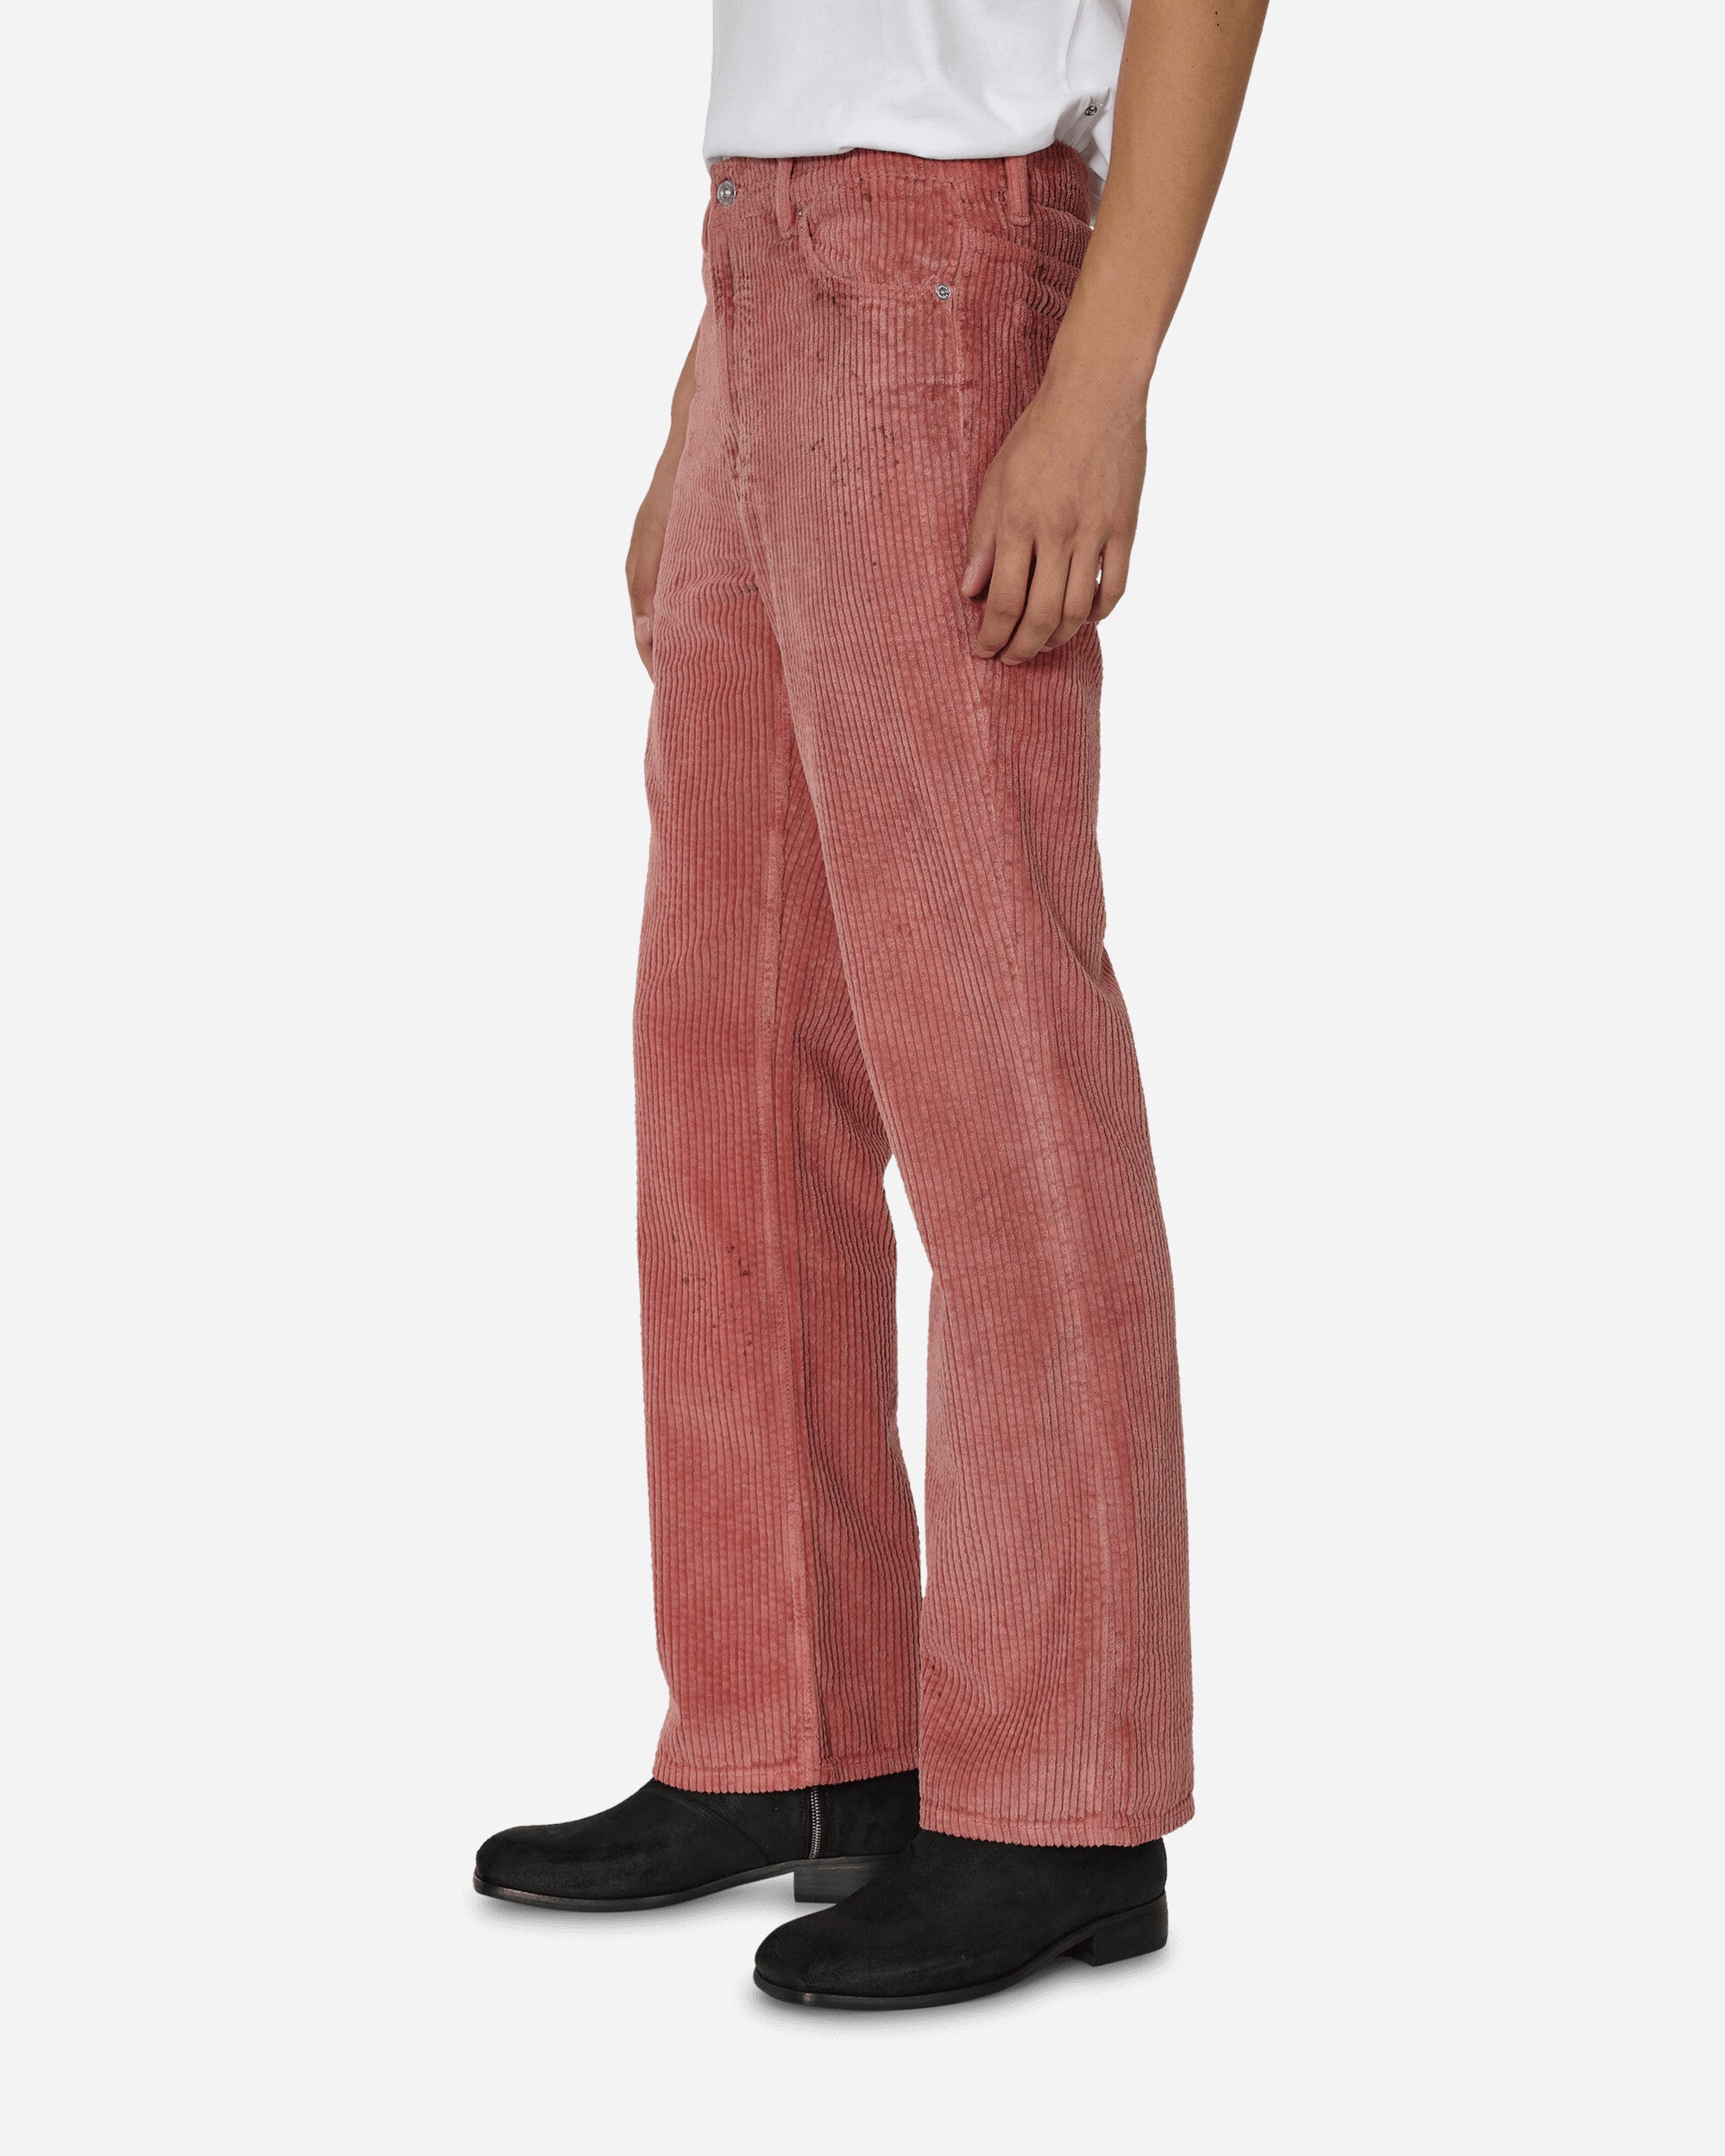 Our Legacy 70S Cut Antique Pink Rustic Cord Pants Trousers M42357A 1